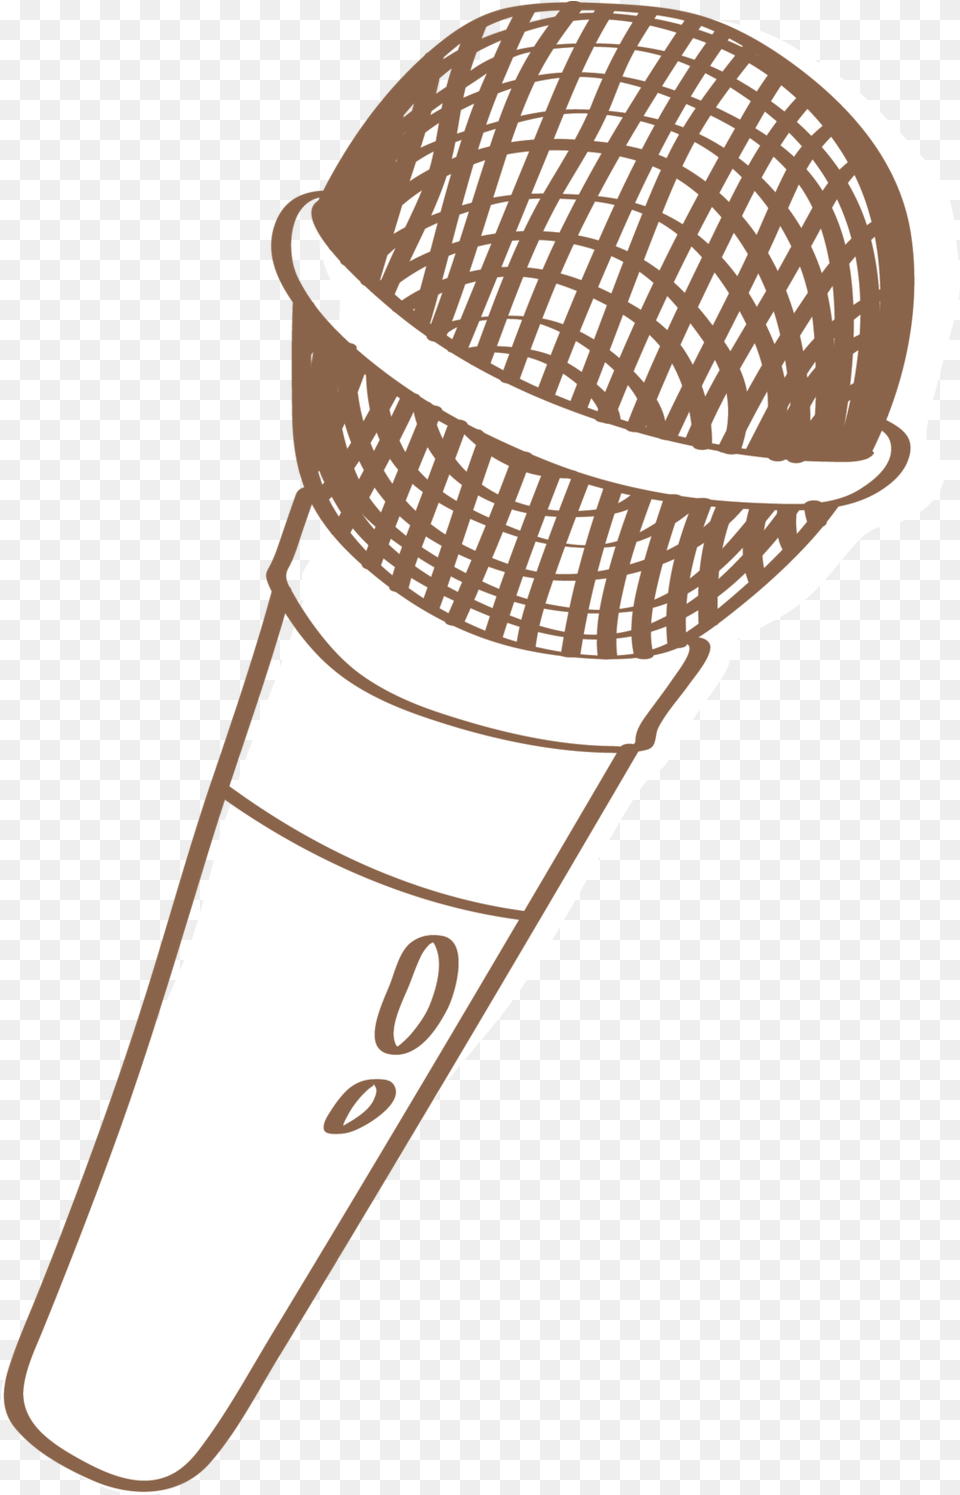 Contact Us U2014 Music Buddies Clip Art, Electrical Device, Microphone, Person Png